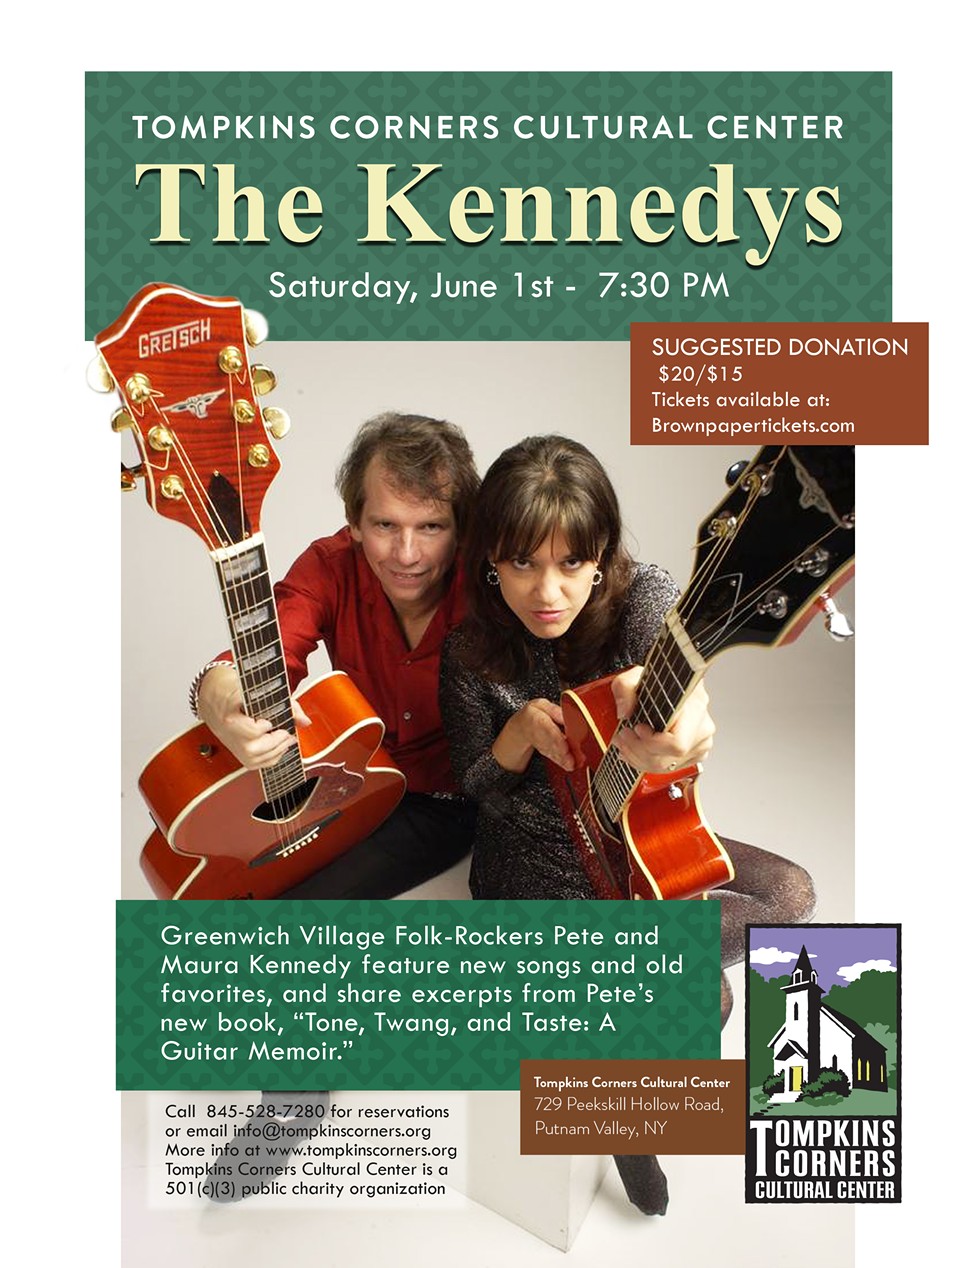 The Kennedys in Concert